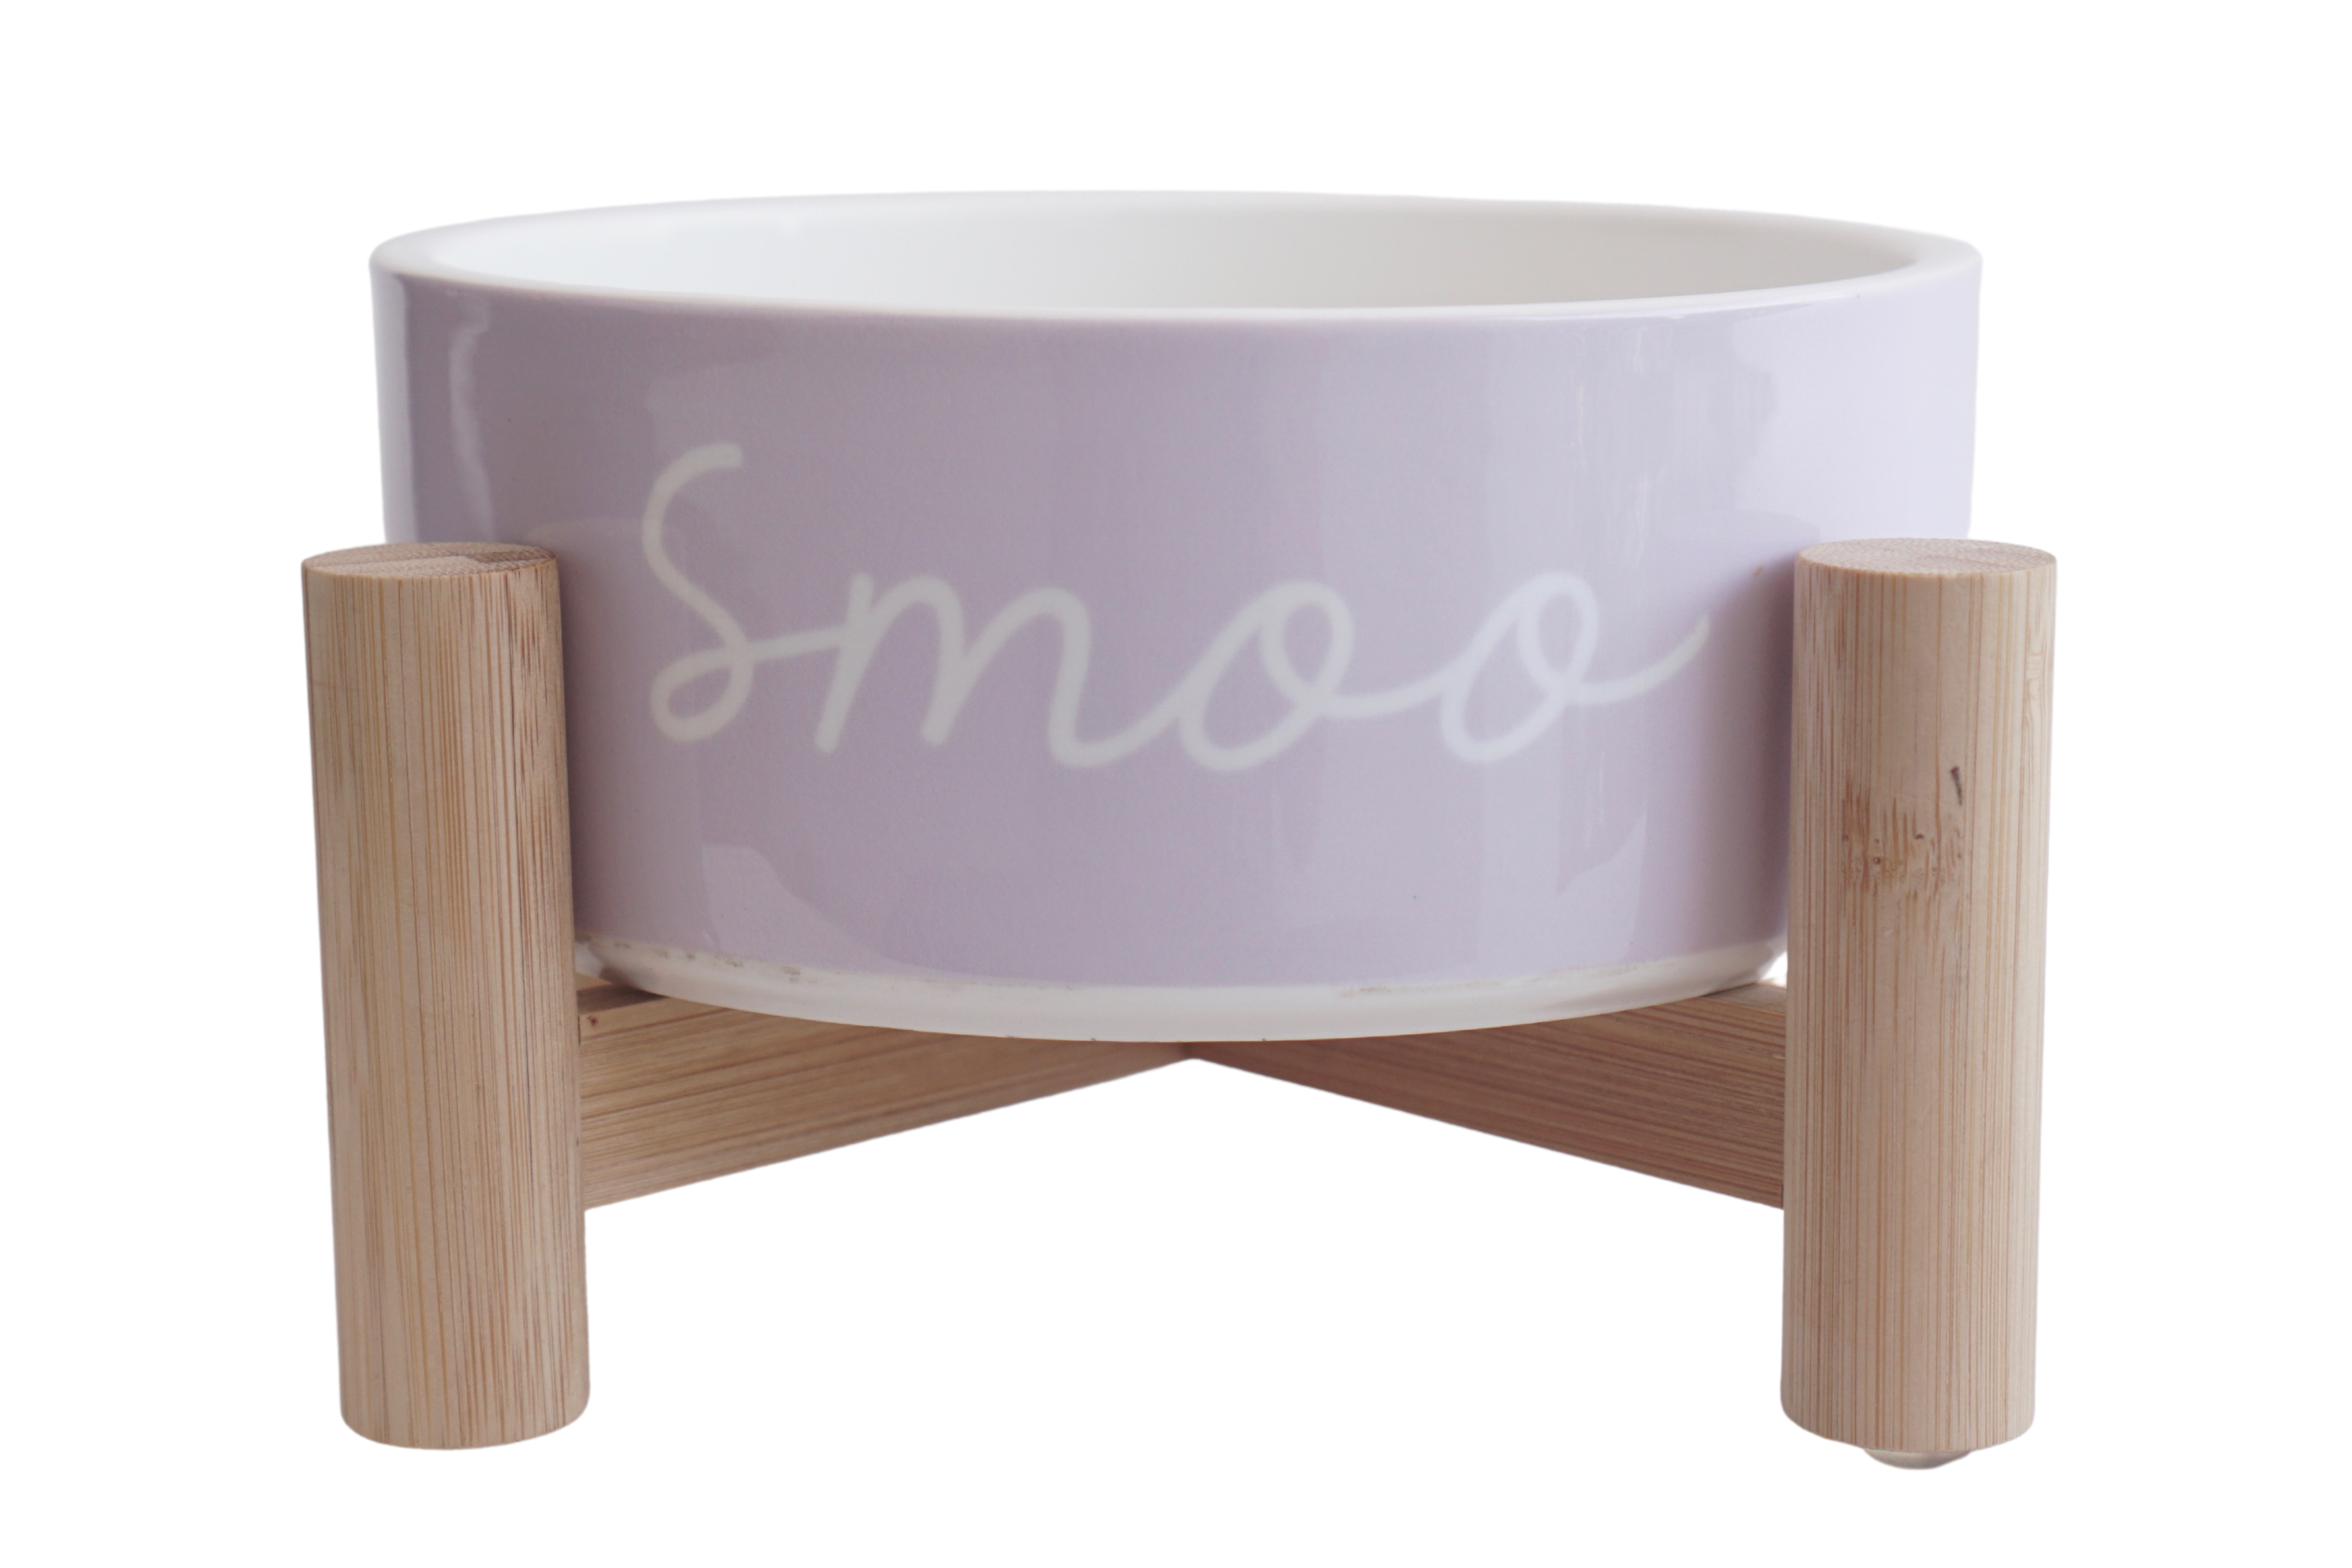 Raised Dog Bowls Stand for Small to Medium Dogs, Bamboo Elevated